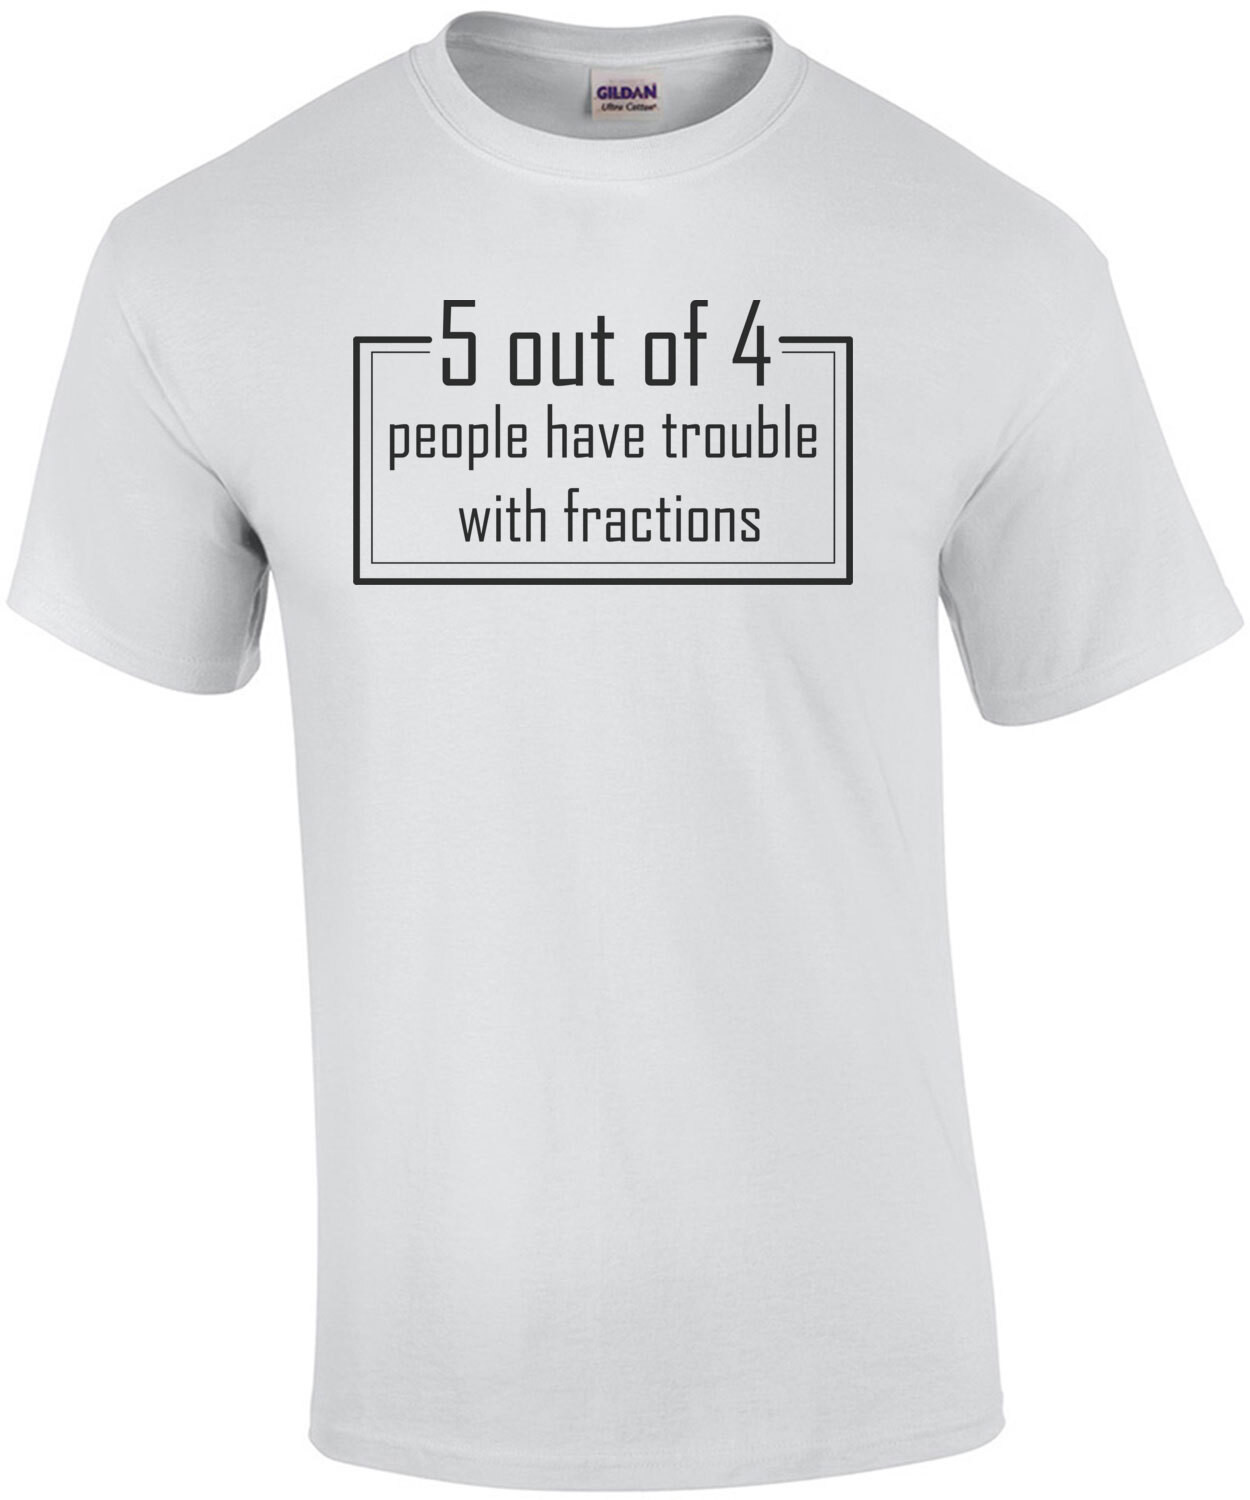 5 Out Of 4 People Have Trouble With Fractions  T-Shirt